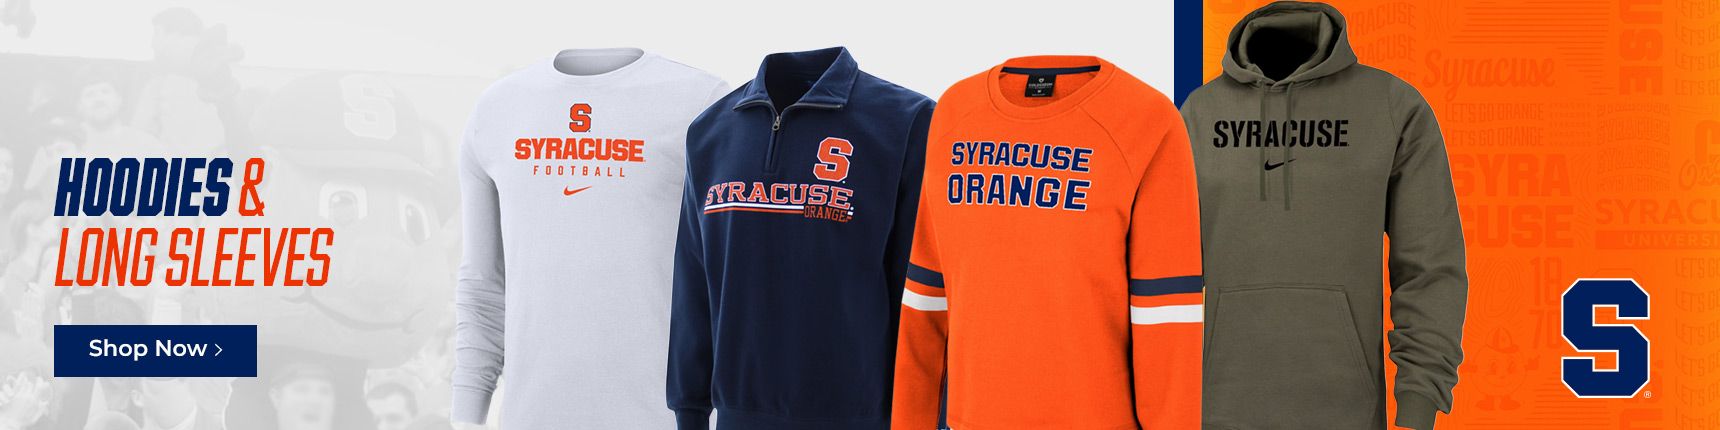 CUSE JERSEY SALE 🍊 Head to the link in our bio to get your hands